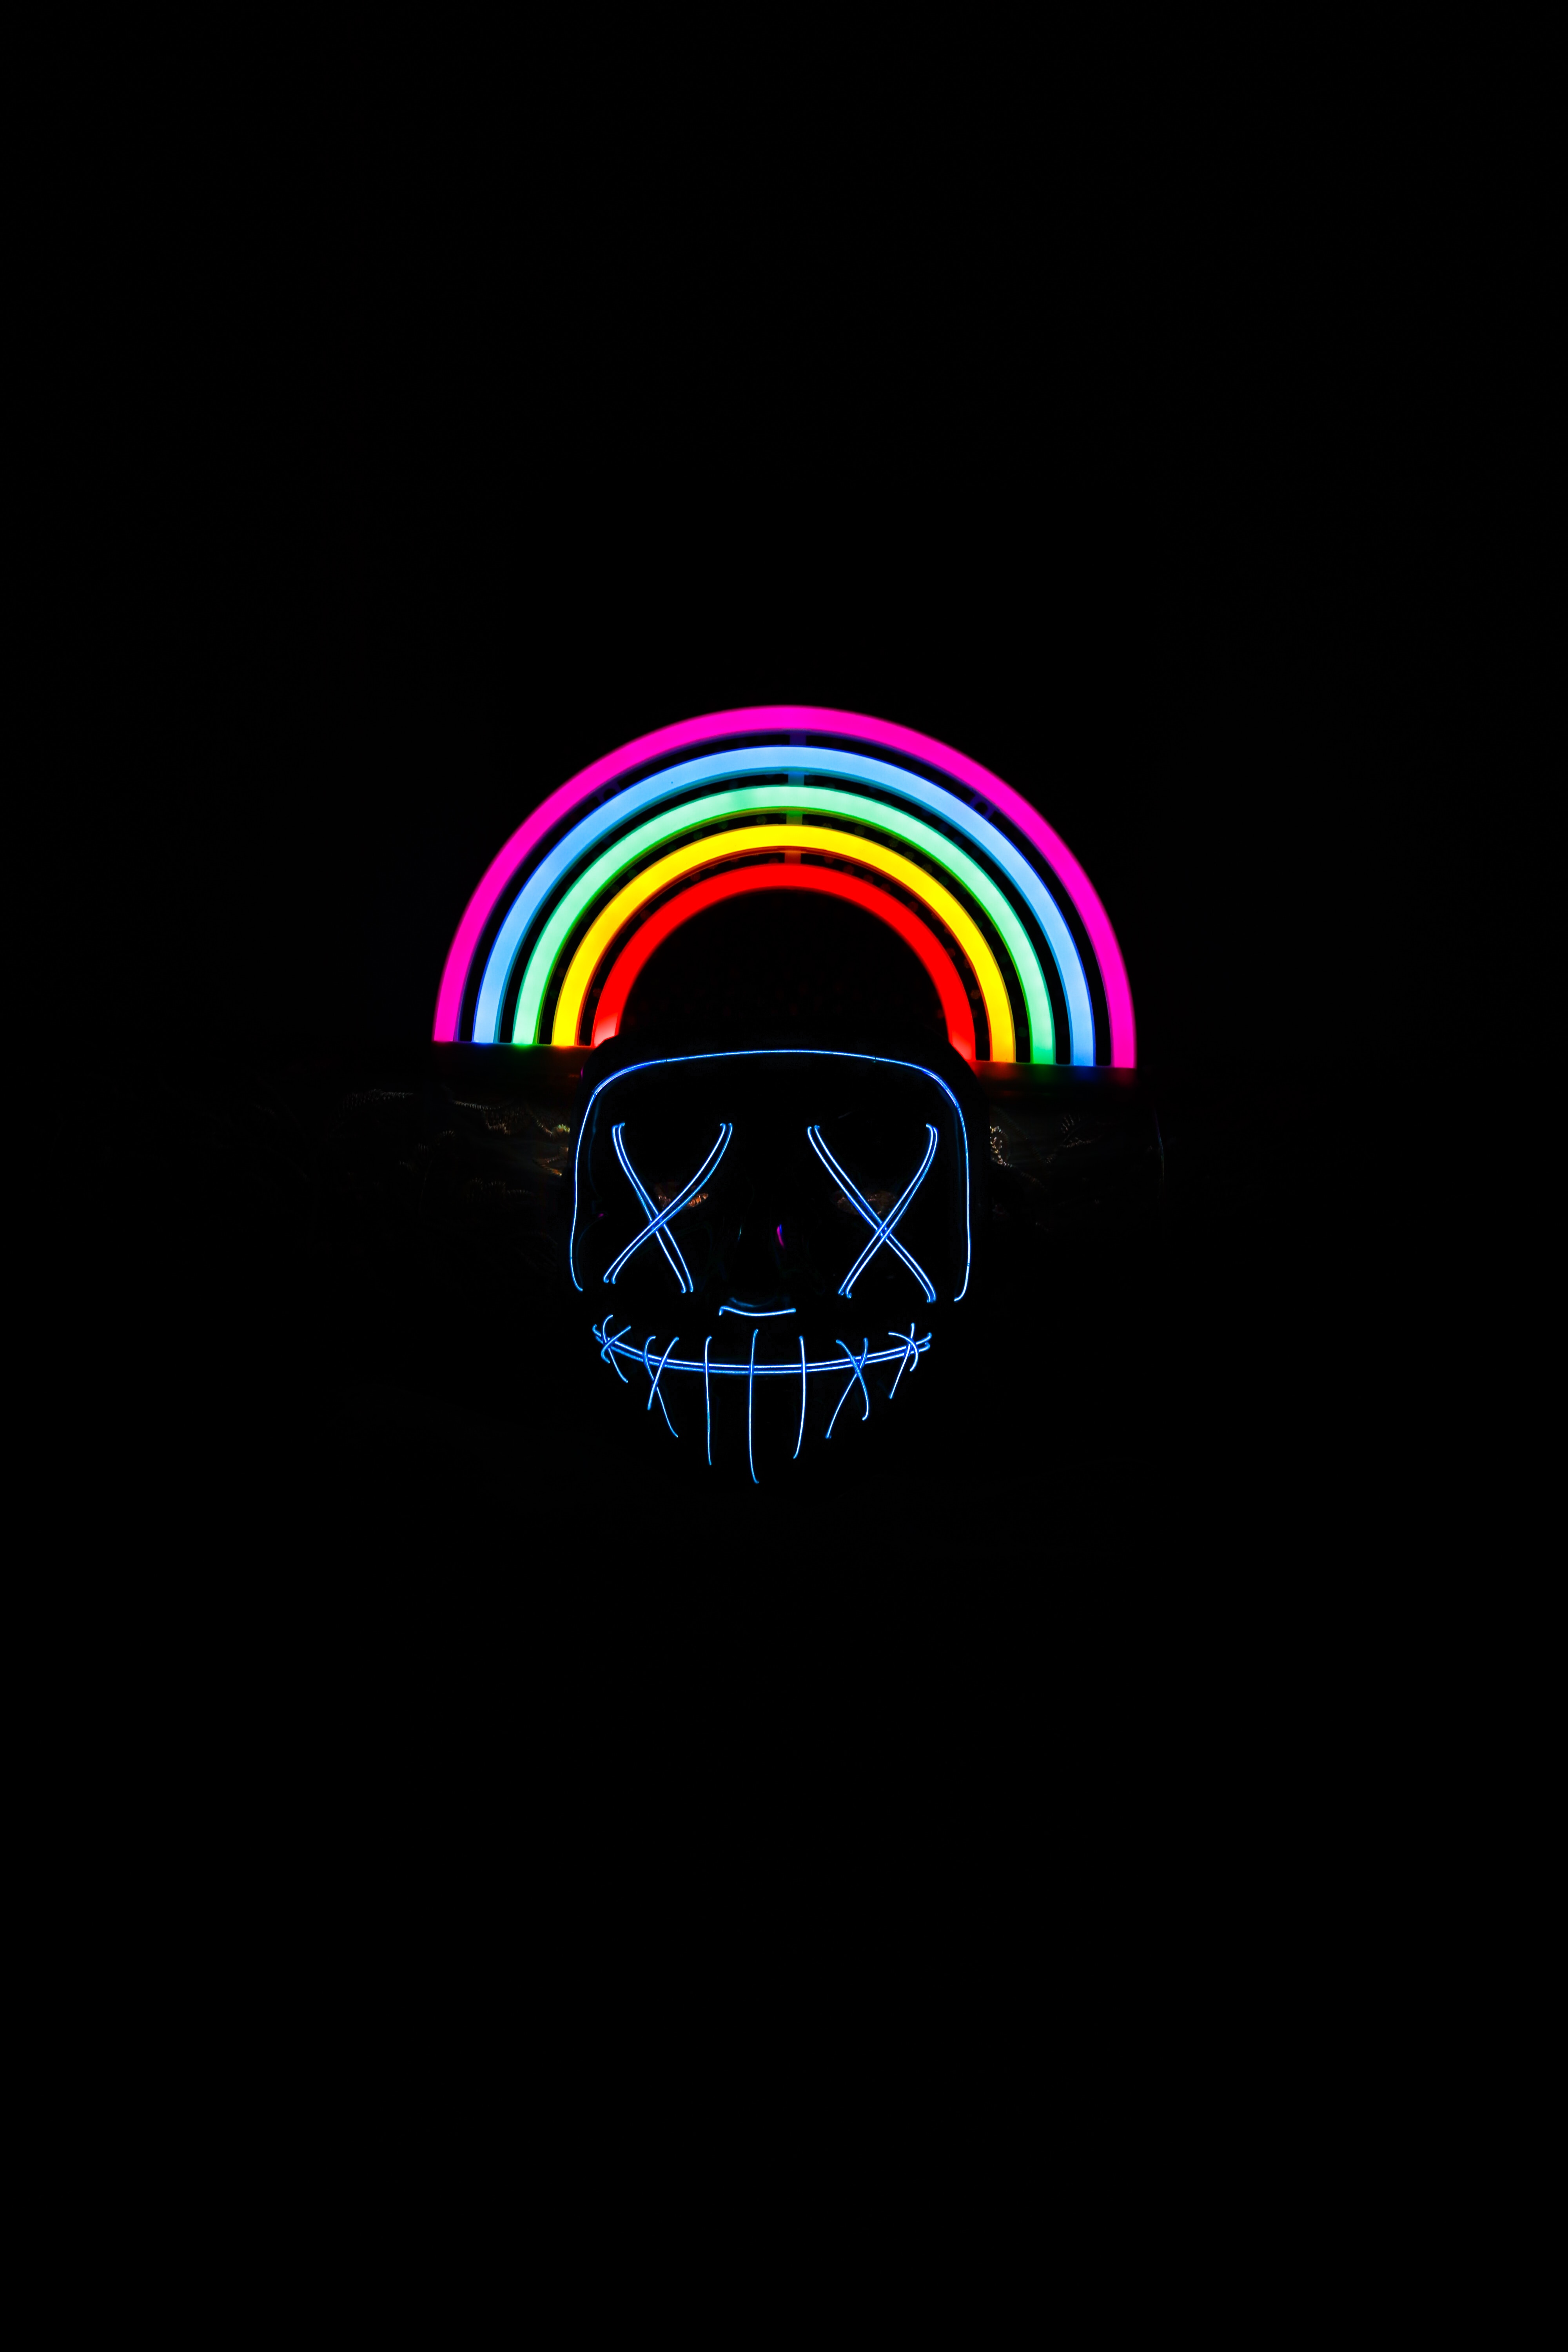 123611 download wallpaper rainbow, dark, neon, mask screensavers and pictures for free